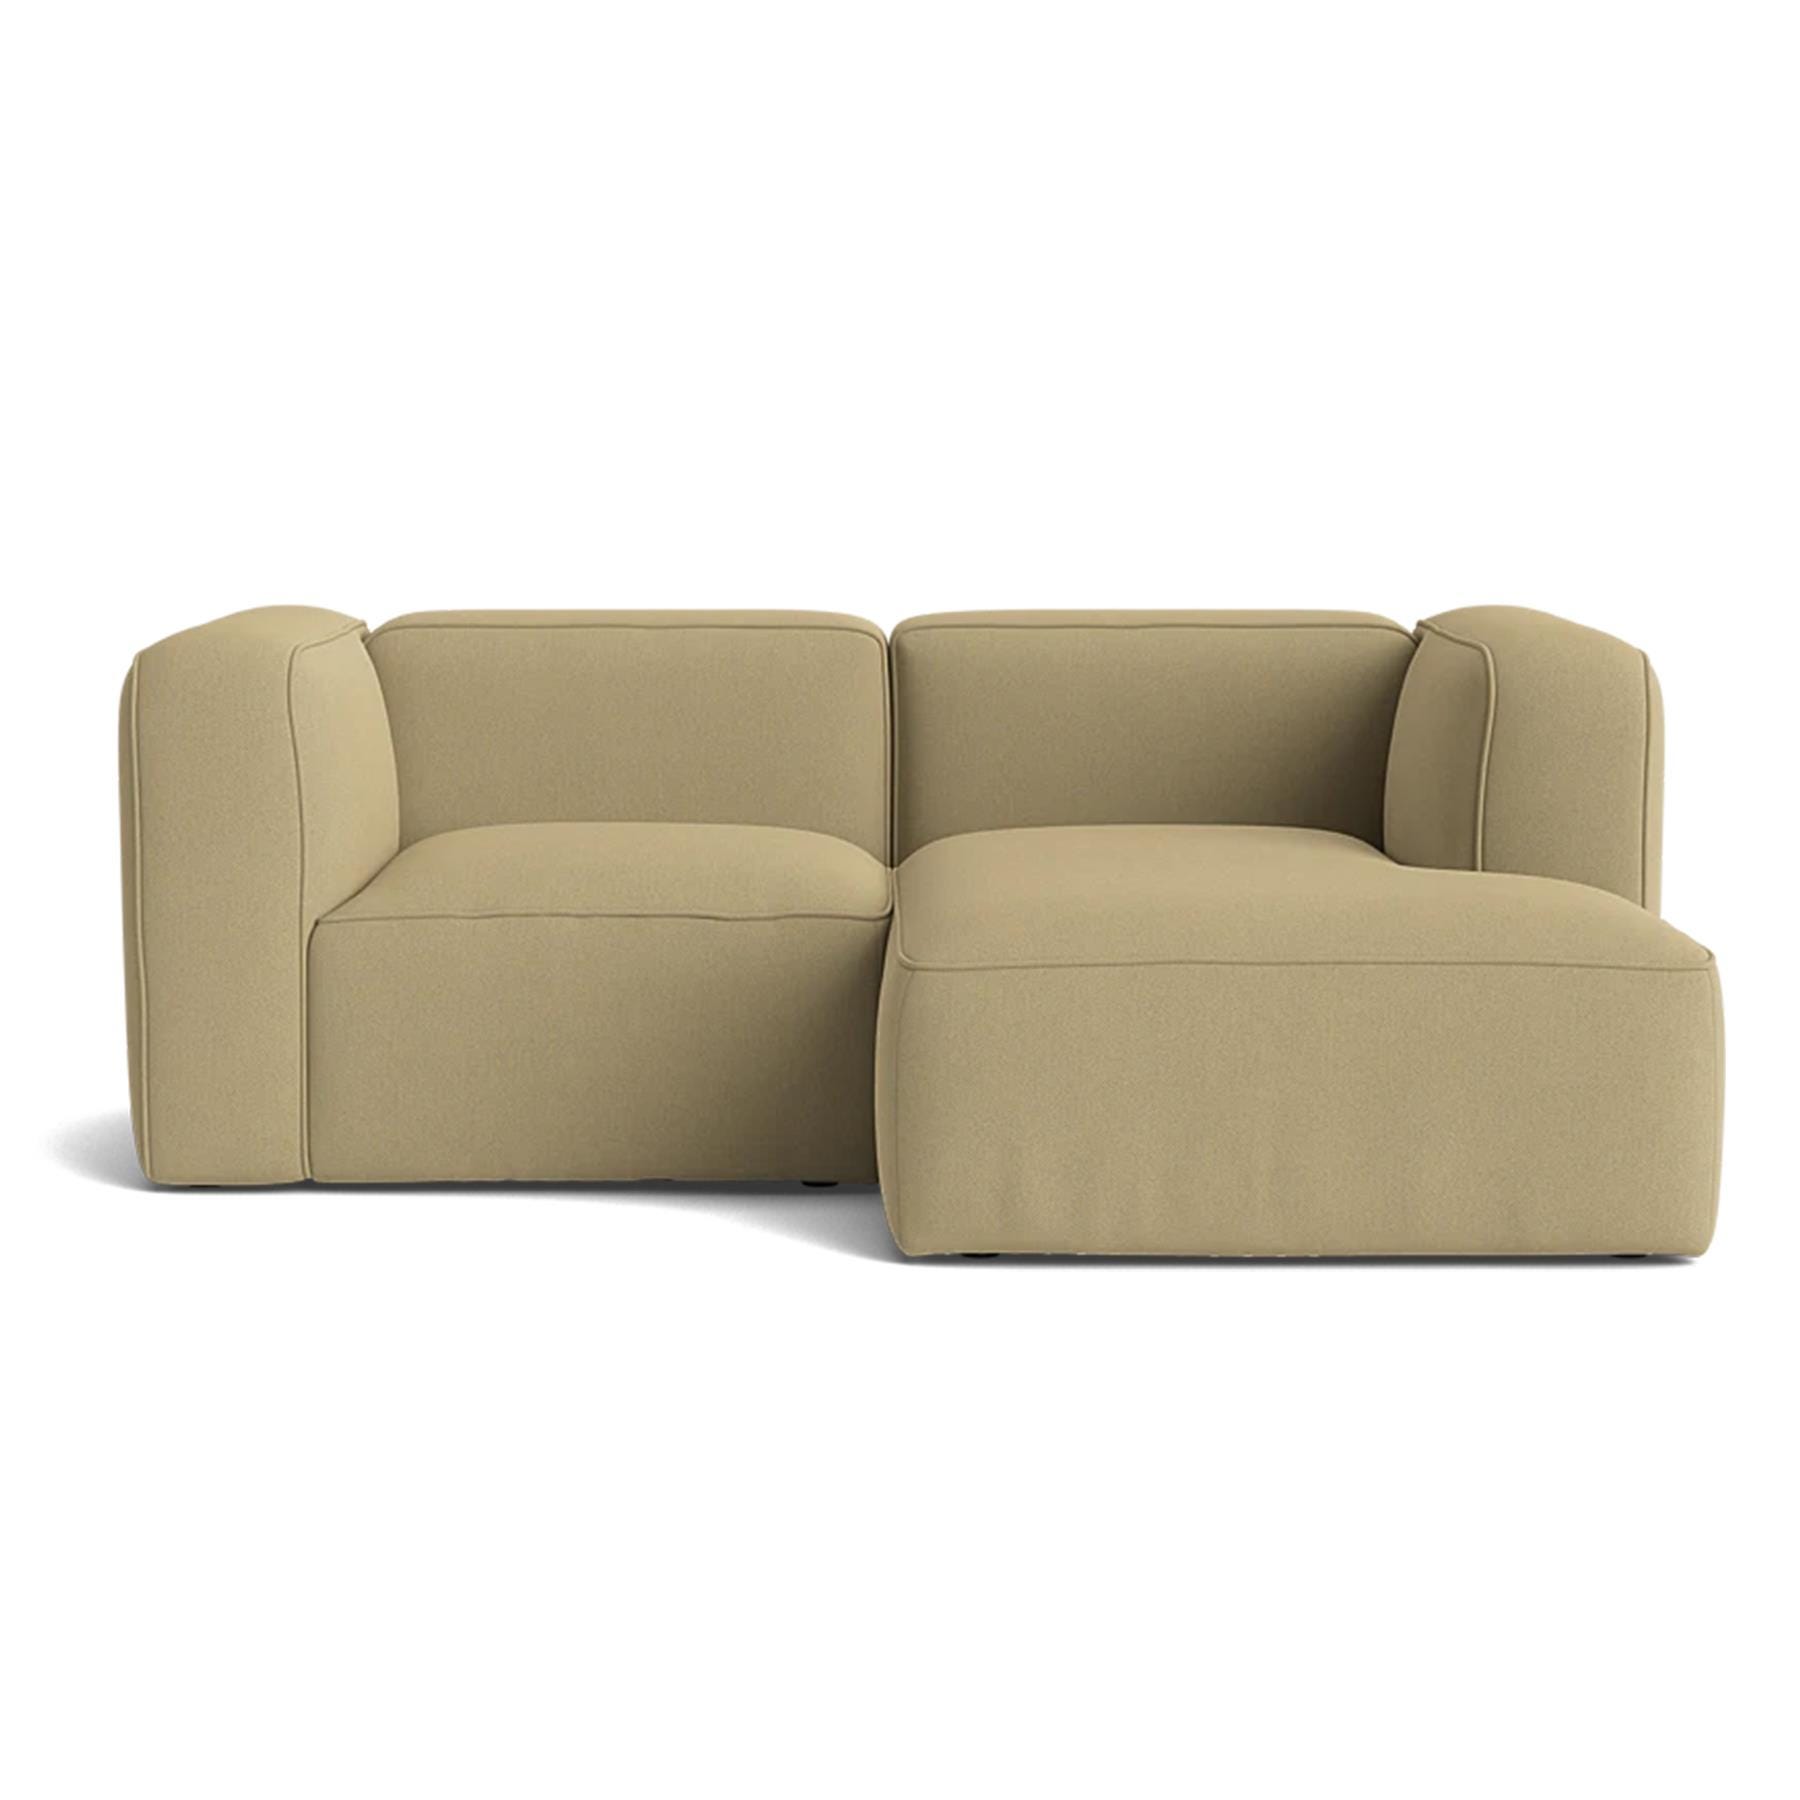 Make Nordic Basecamp Small Sofa Fiord 422 Right Yellow Designer Furniture From Holloways Of Ludlow